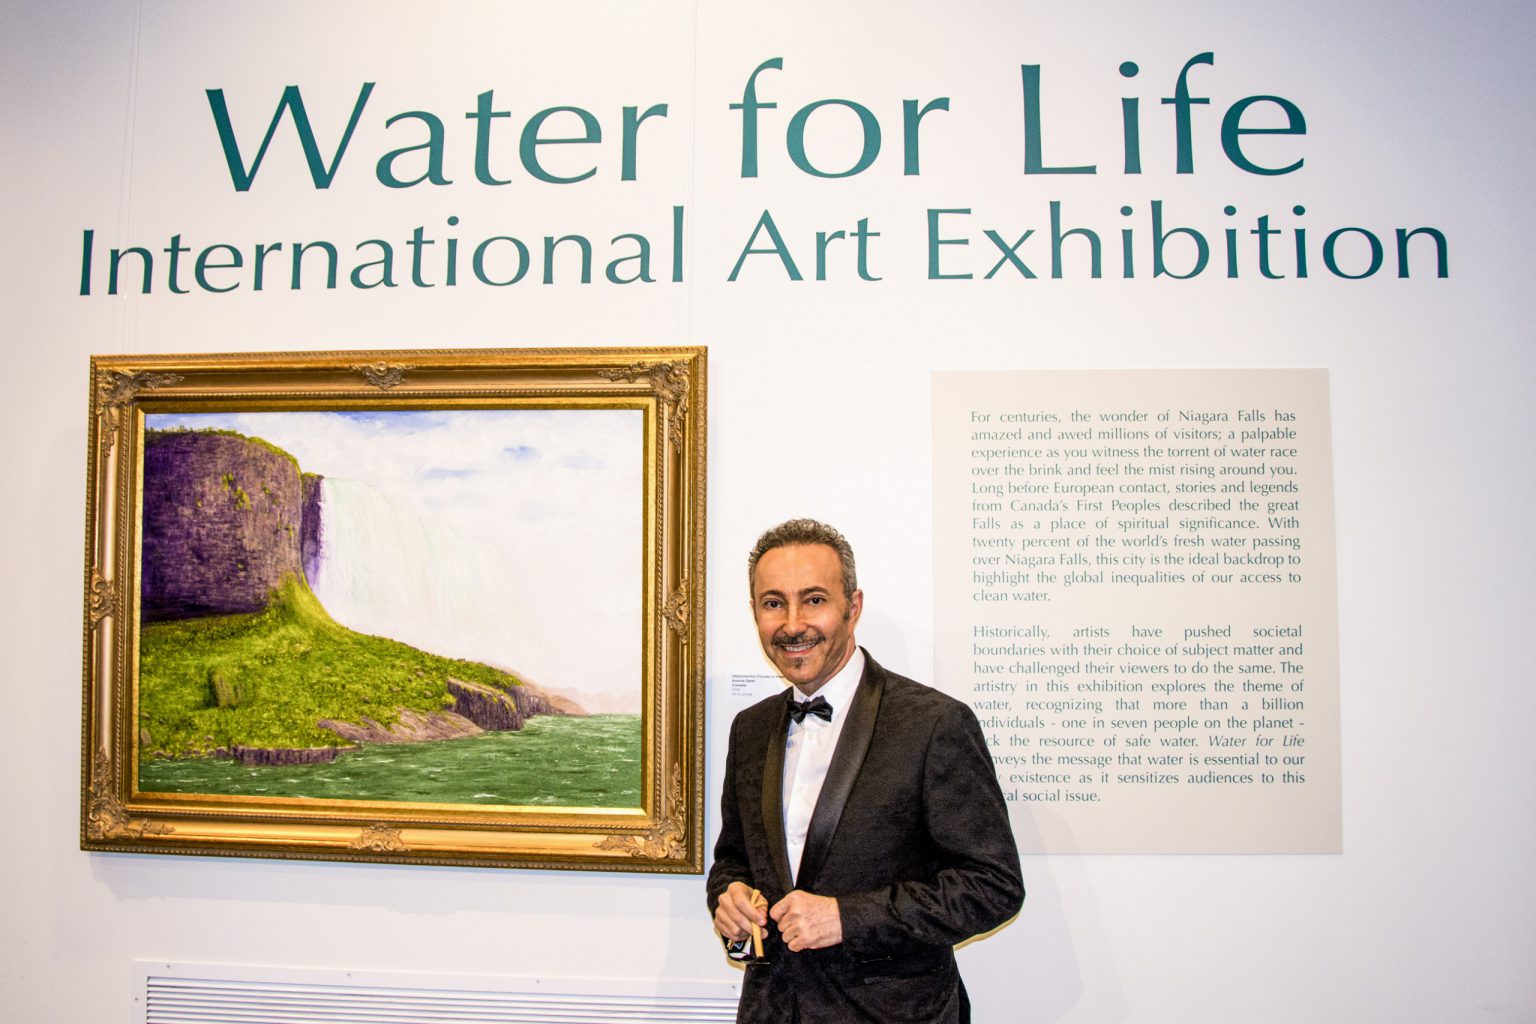 Event Curator / Art Director, Antoine Gaber during the Water for Life, international Art Exhibition, First Edition, opening at the Niagara Falls History Museum, Niagara Falls.